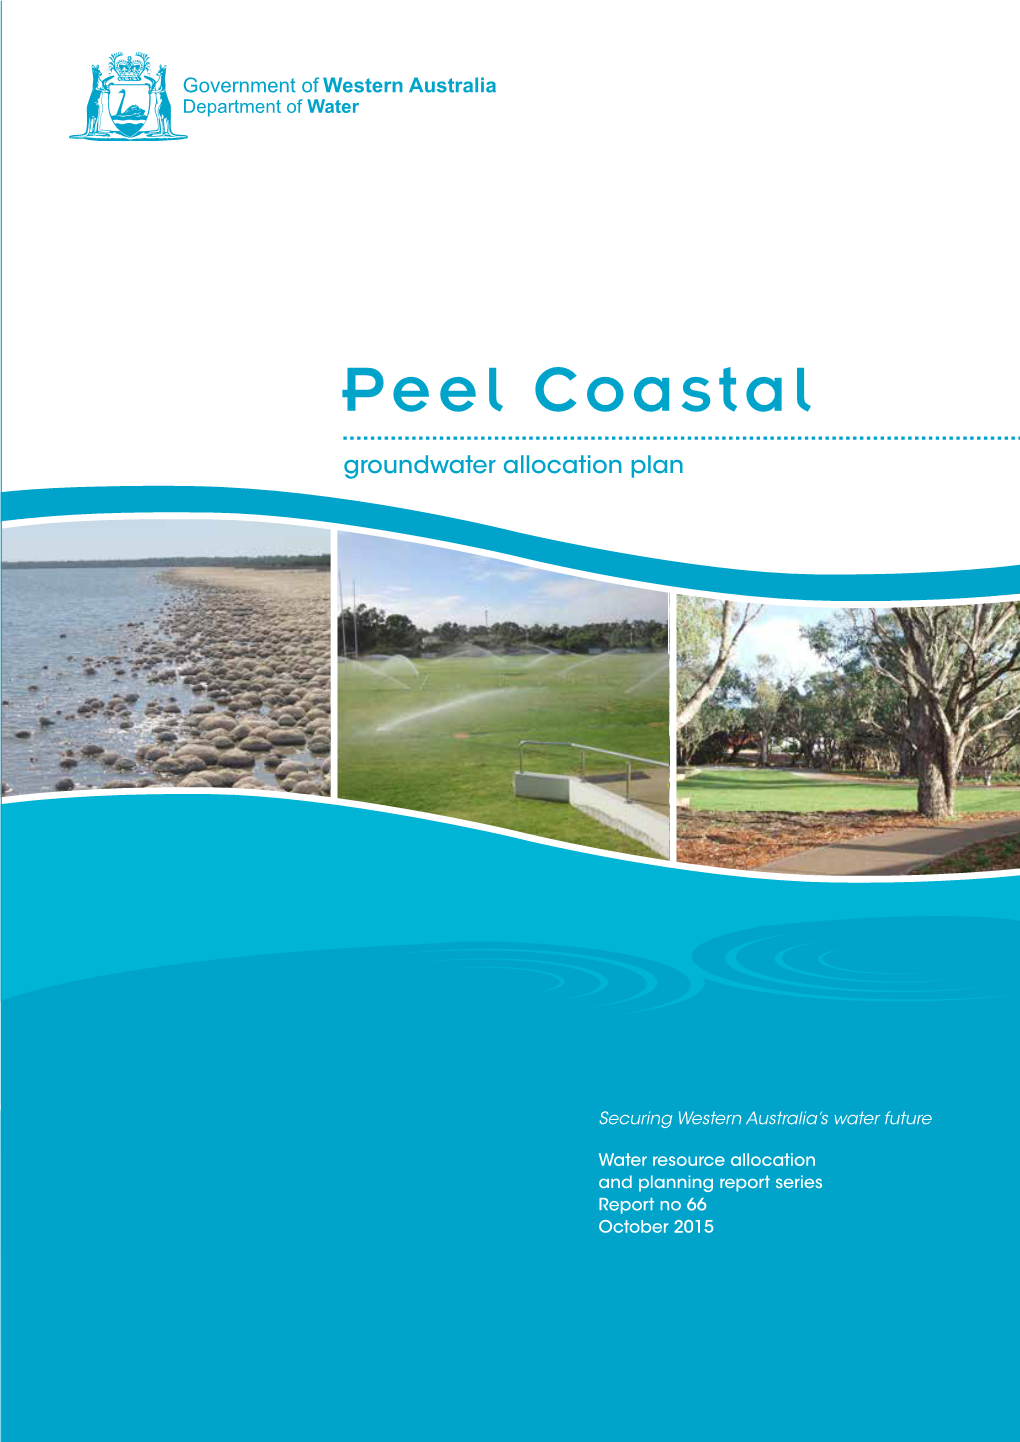 Peel Coastal Groundwater Allocation Plan Message from the Minister